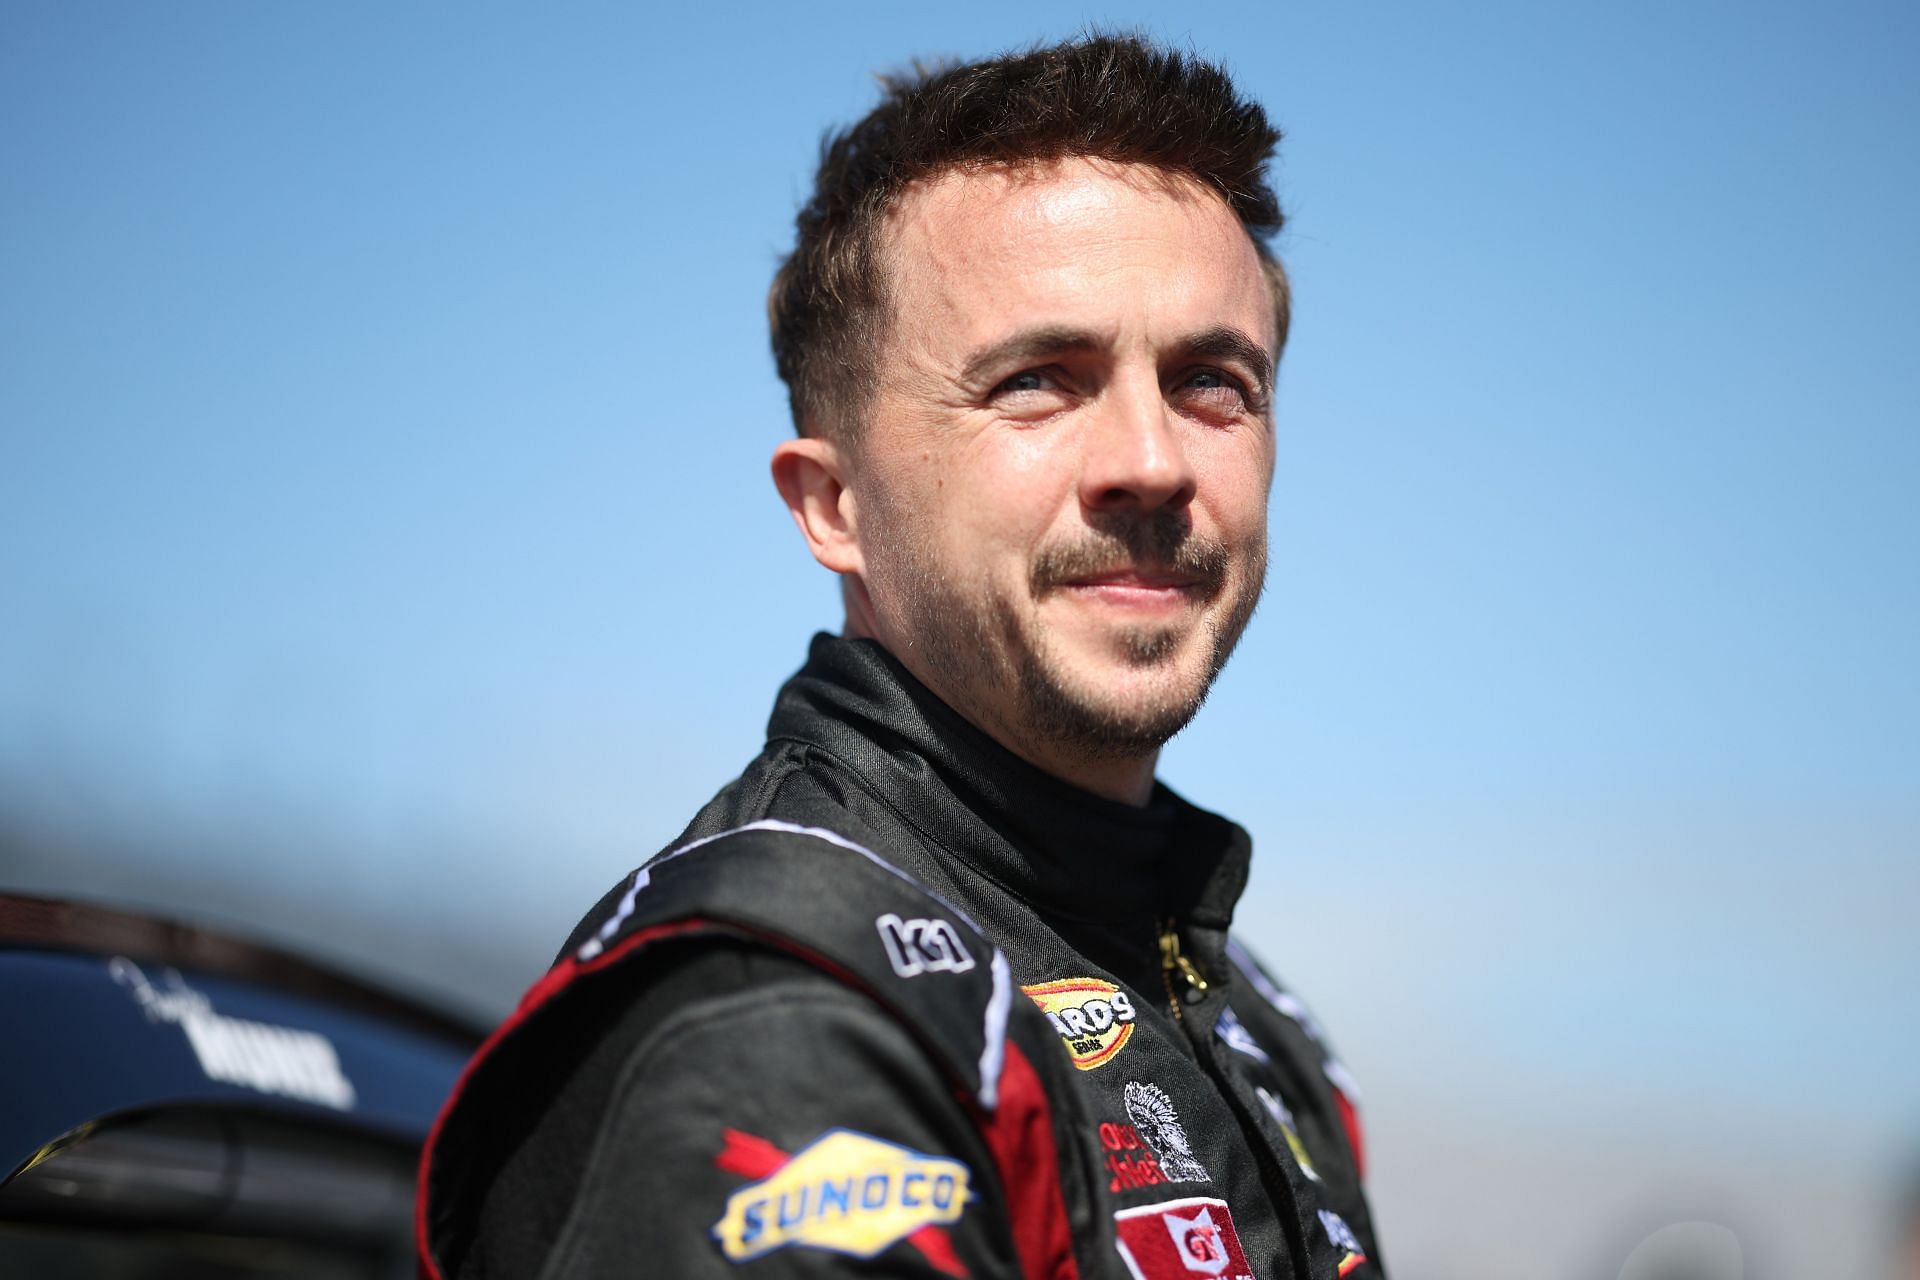 Frankie Muniz sets sights on an Xfinity or a Truck Series drive in the